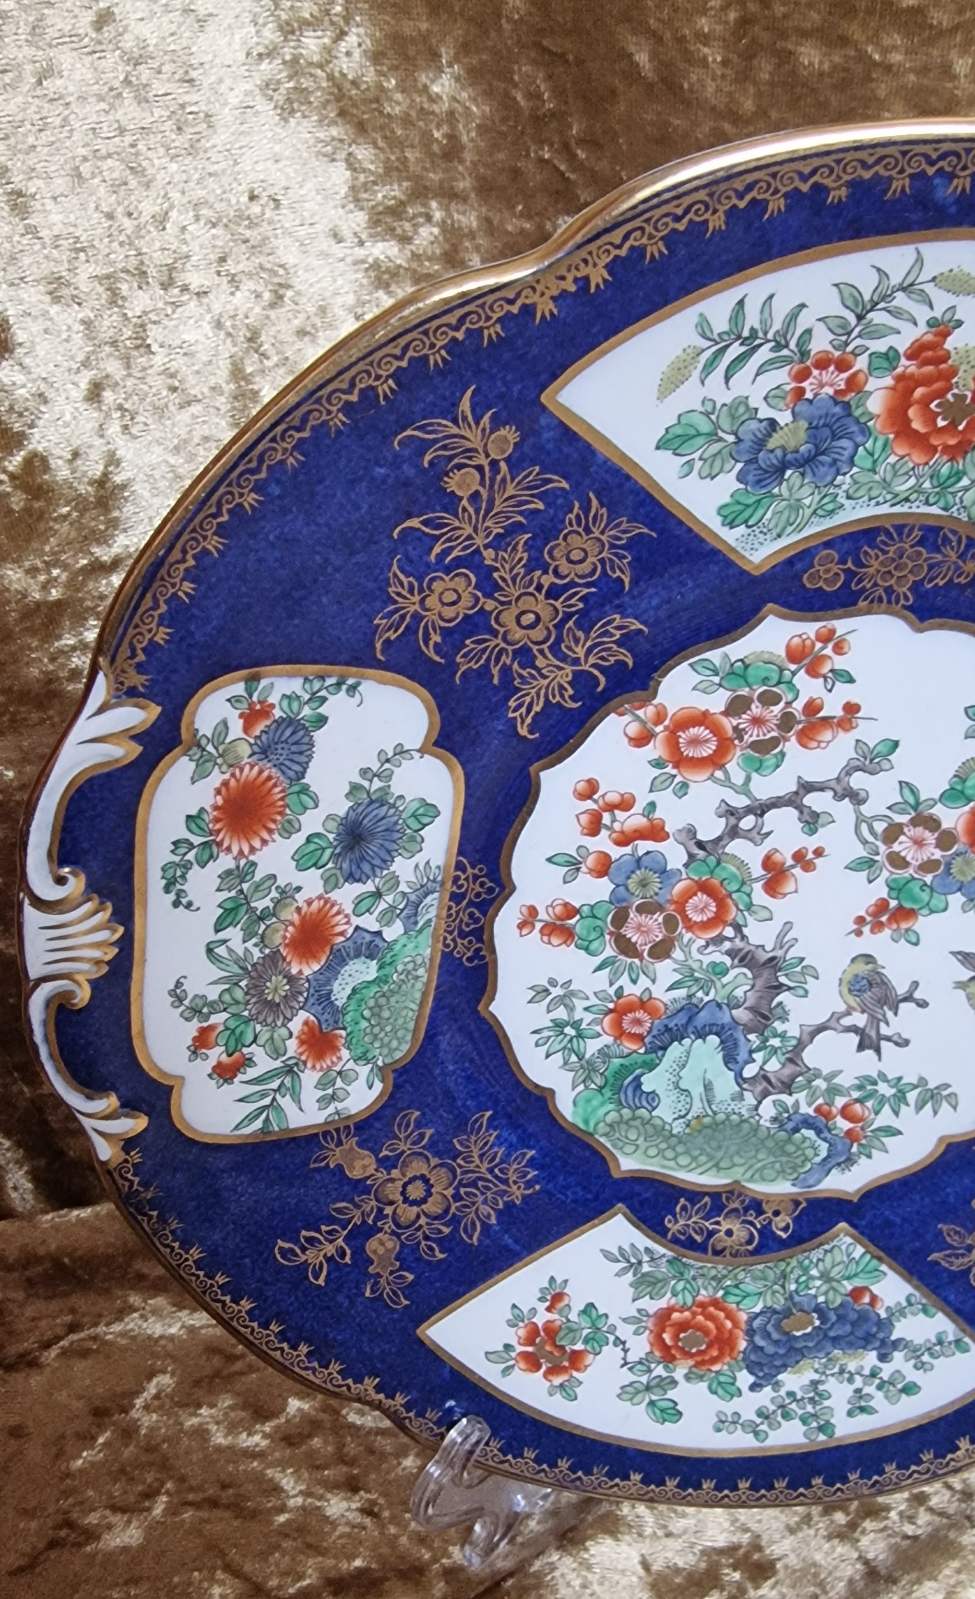 Antique Booths Tiffany plate adorned with blue and gold floral and bird motifs